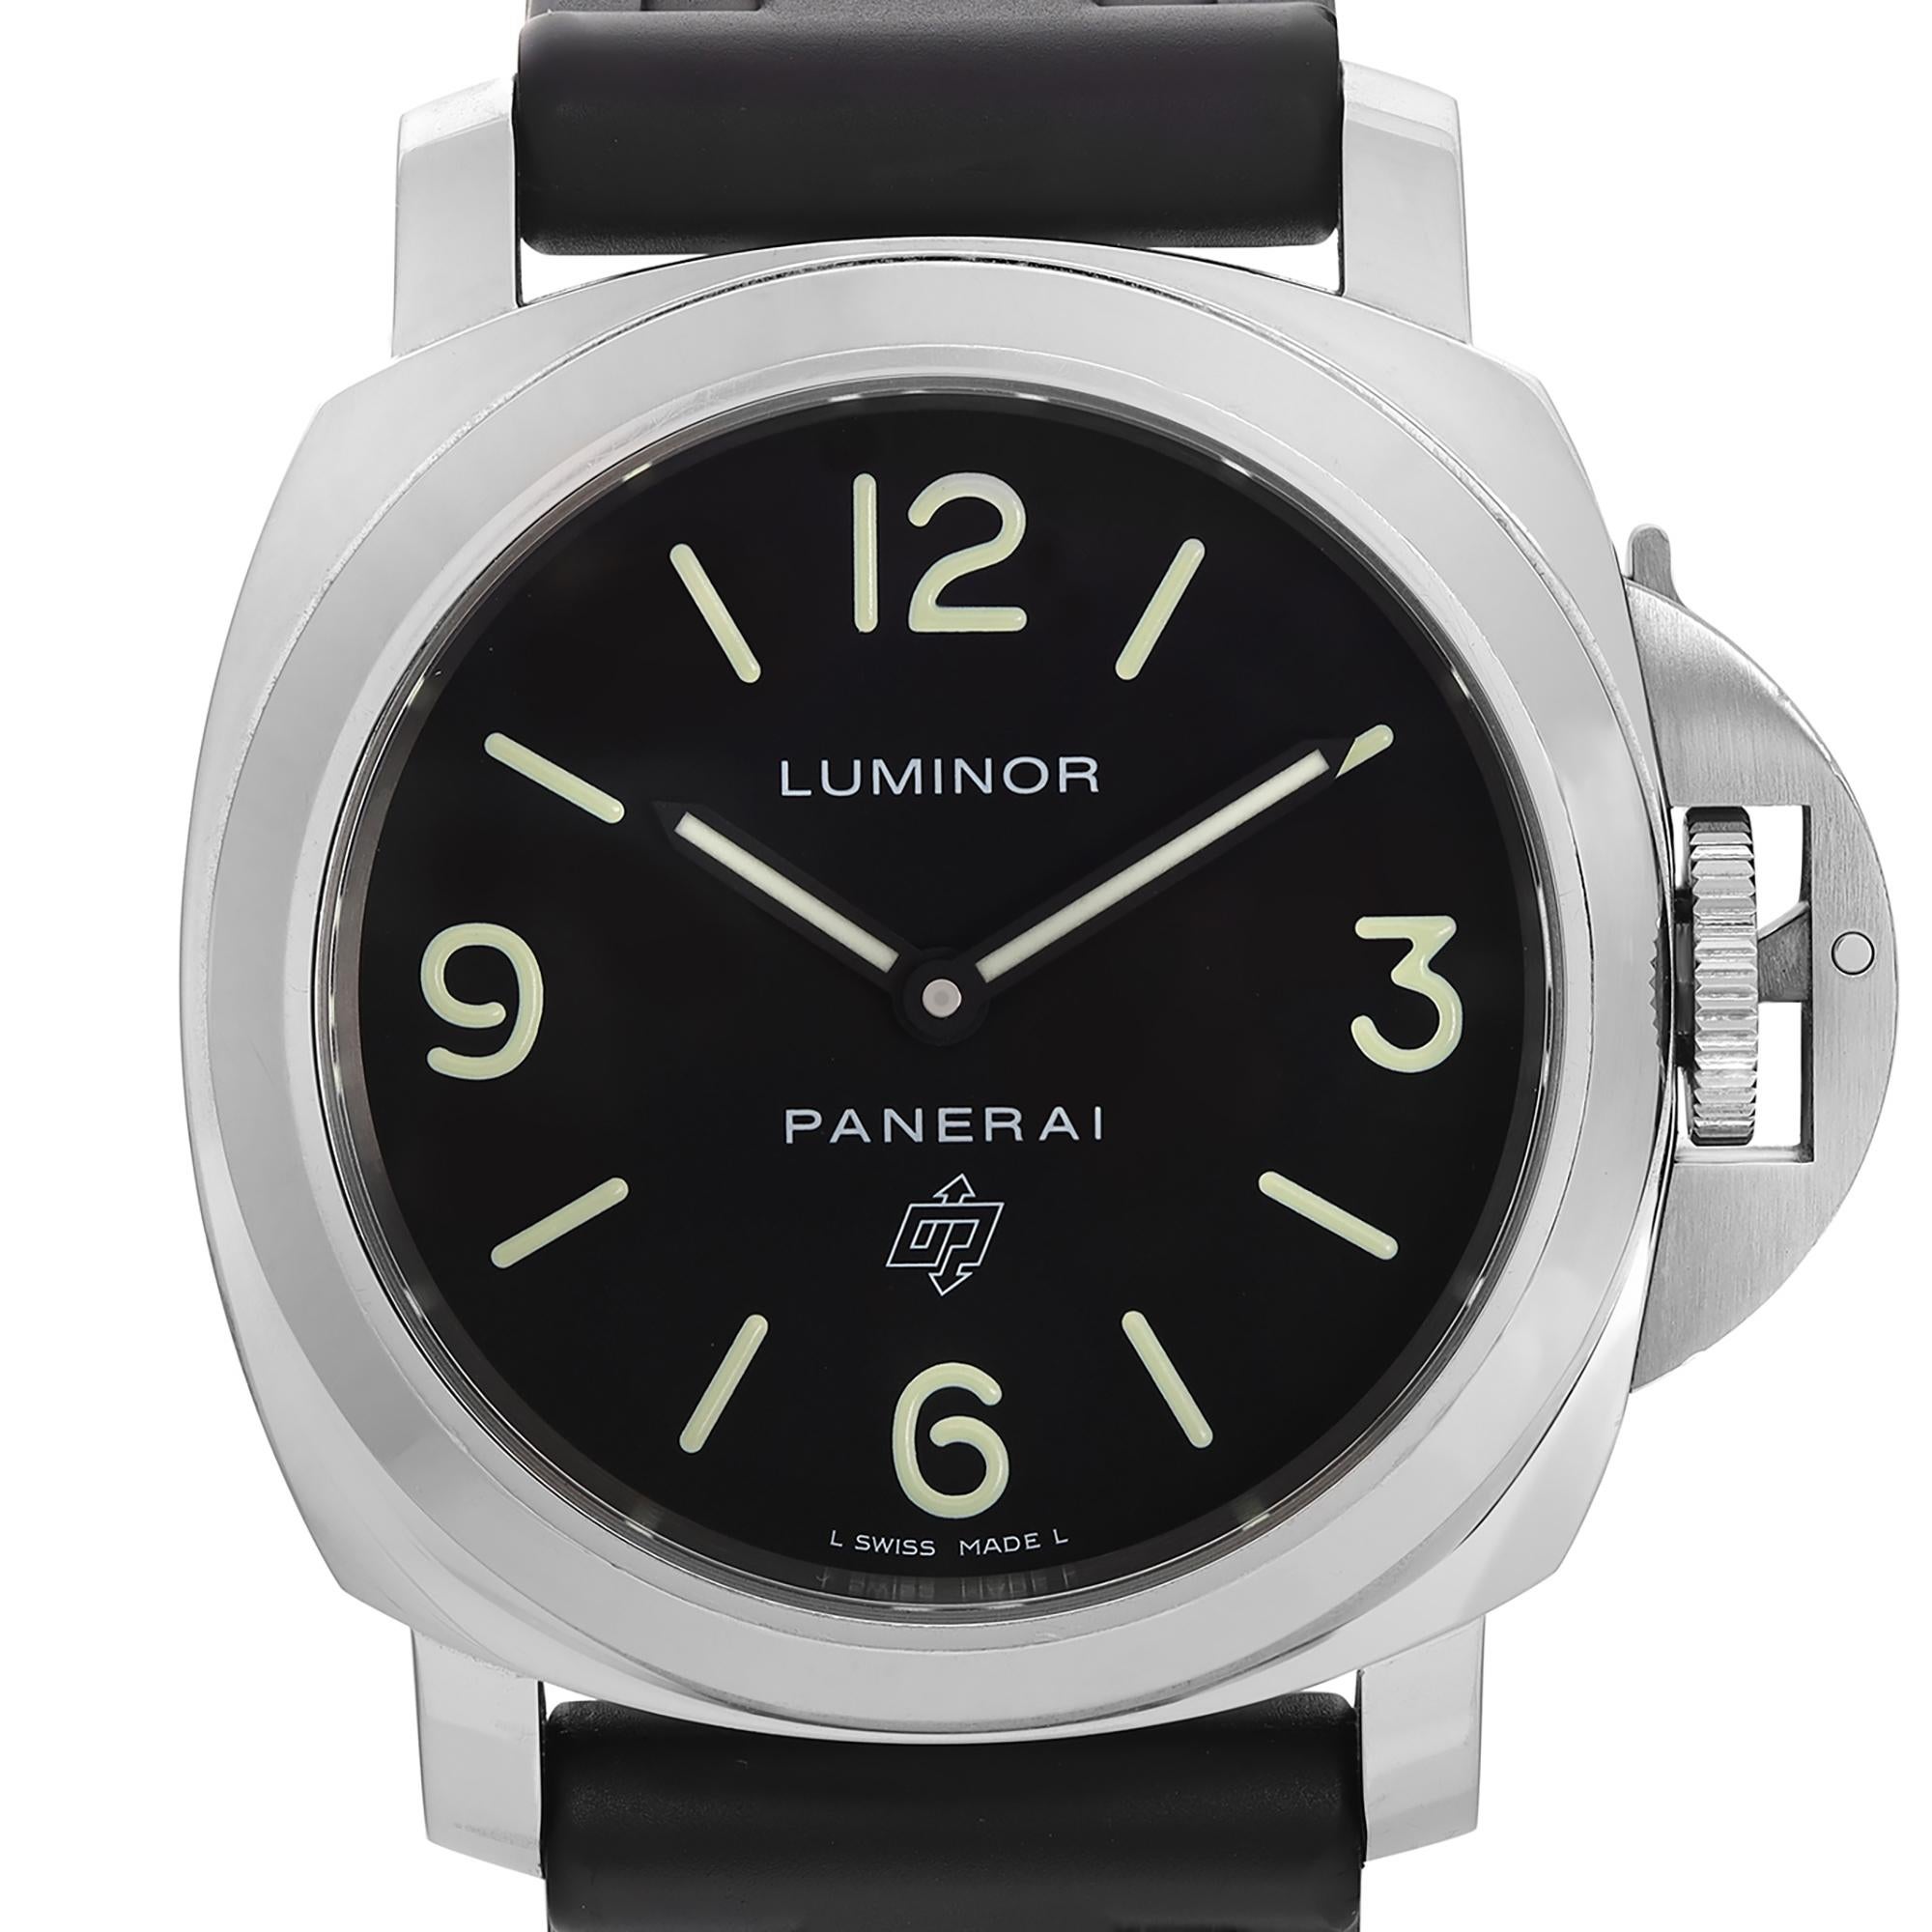 This Panerai Luminor is a mechanical hand-wind pre-owned watch. The watch was produced in 2017. Comes with an original box and Panerai warranty card. No manual. Covered by a 3-year Chronostore Warranty.

Brand: Panerai  Type: Wristwatch  Department: